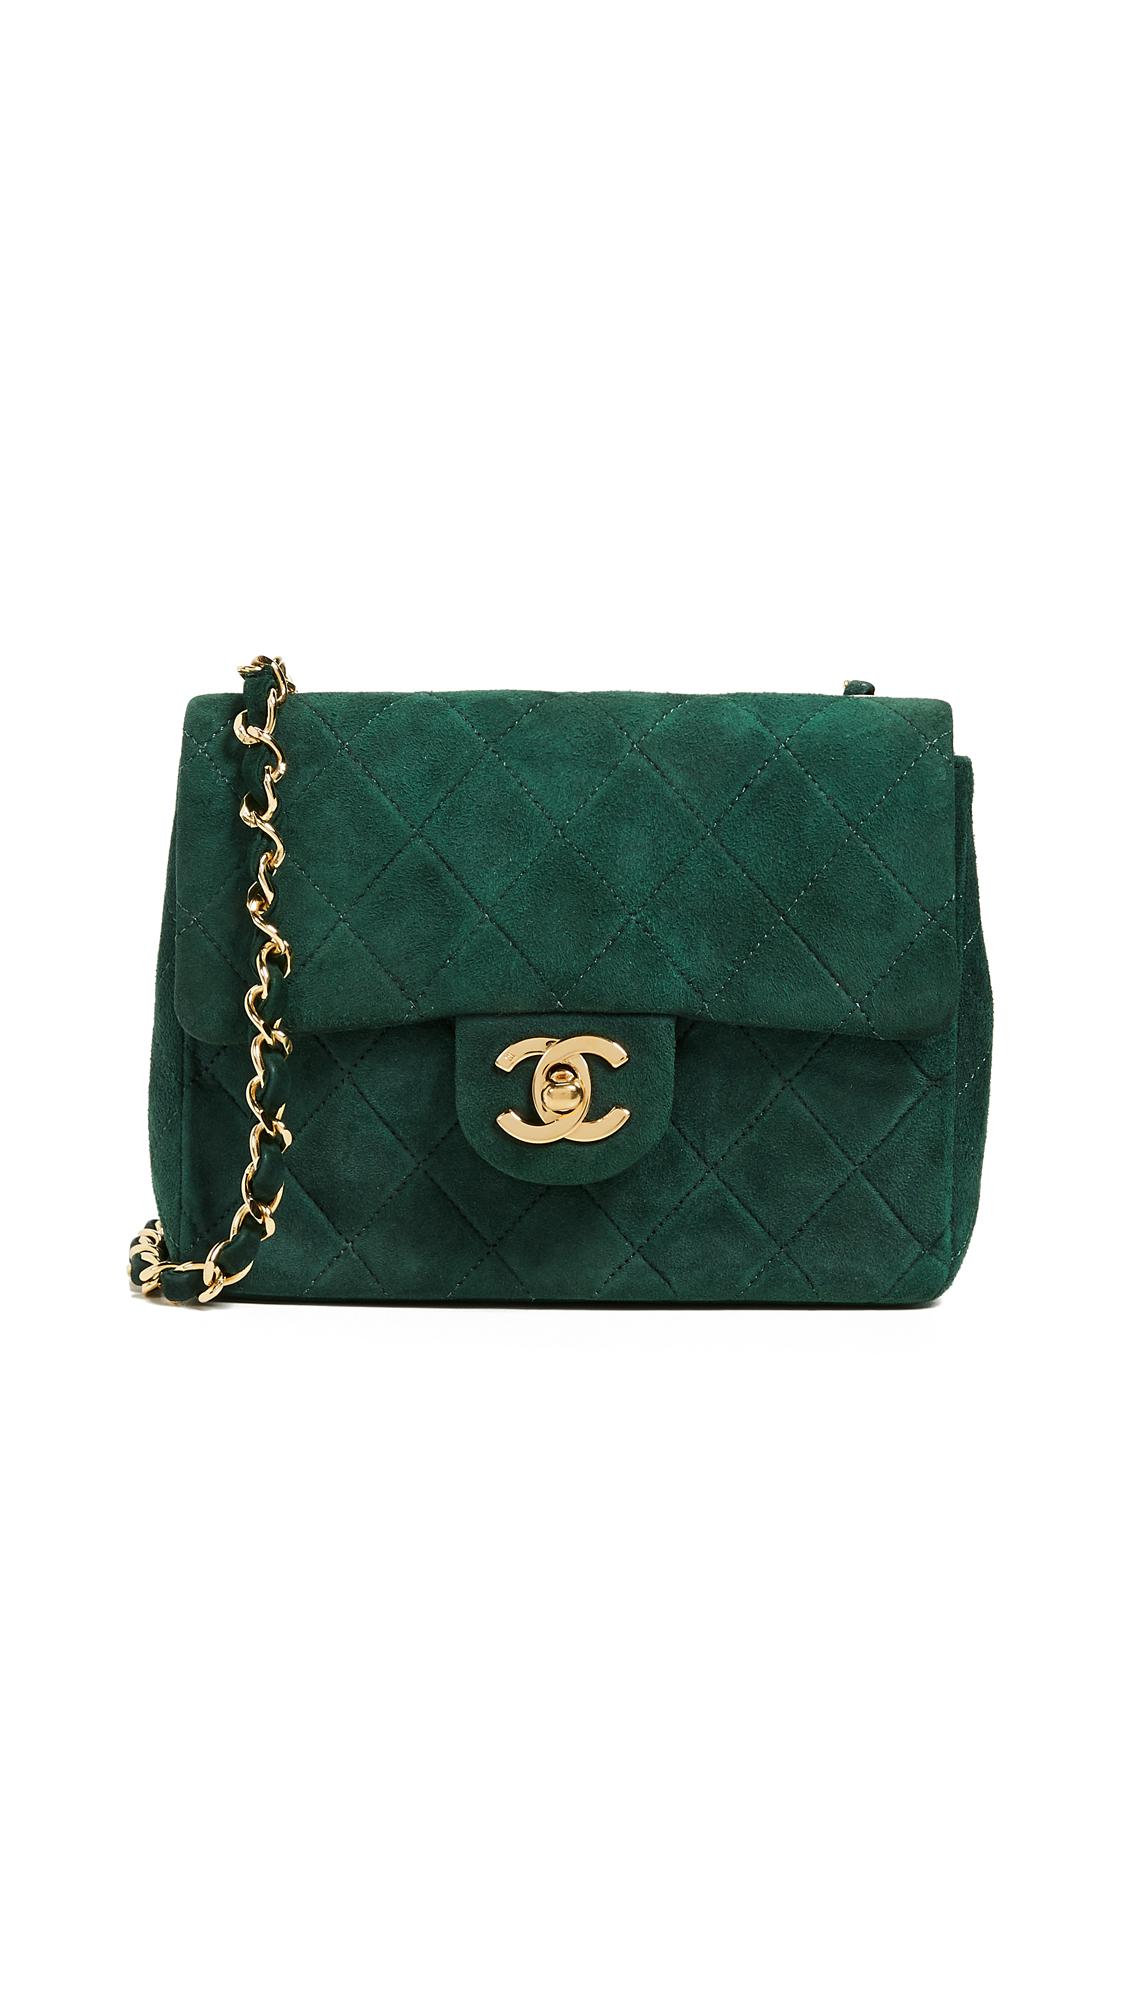 What Goes Around Comes Around Chanel Suede Half Flap Mini Bag in